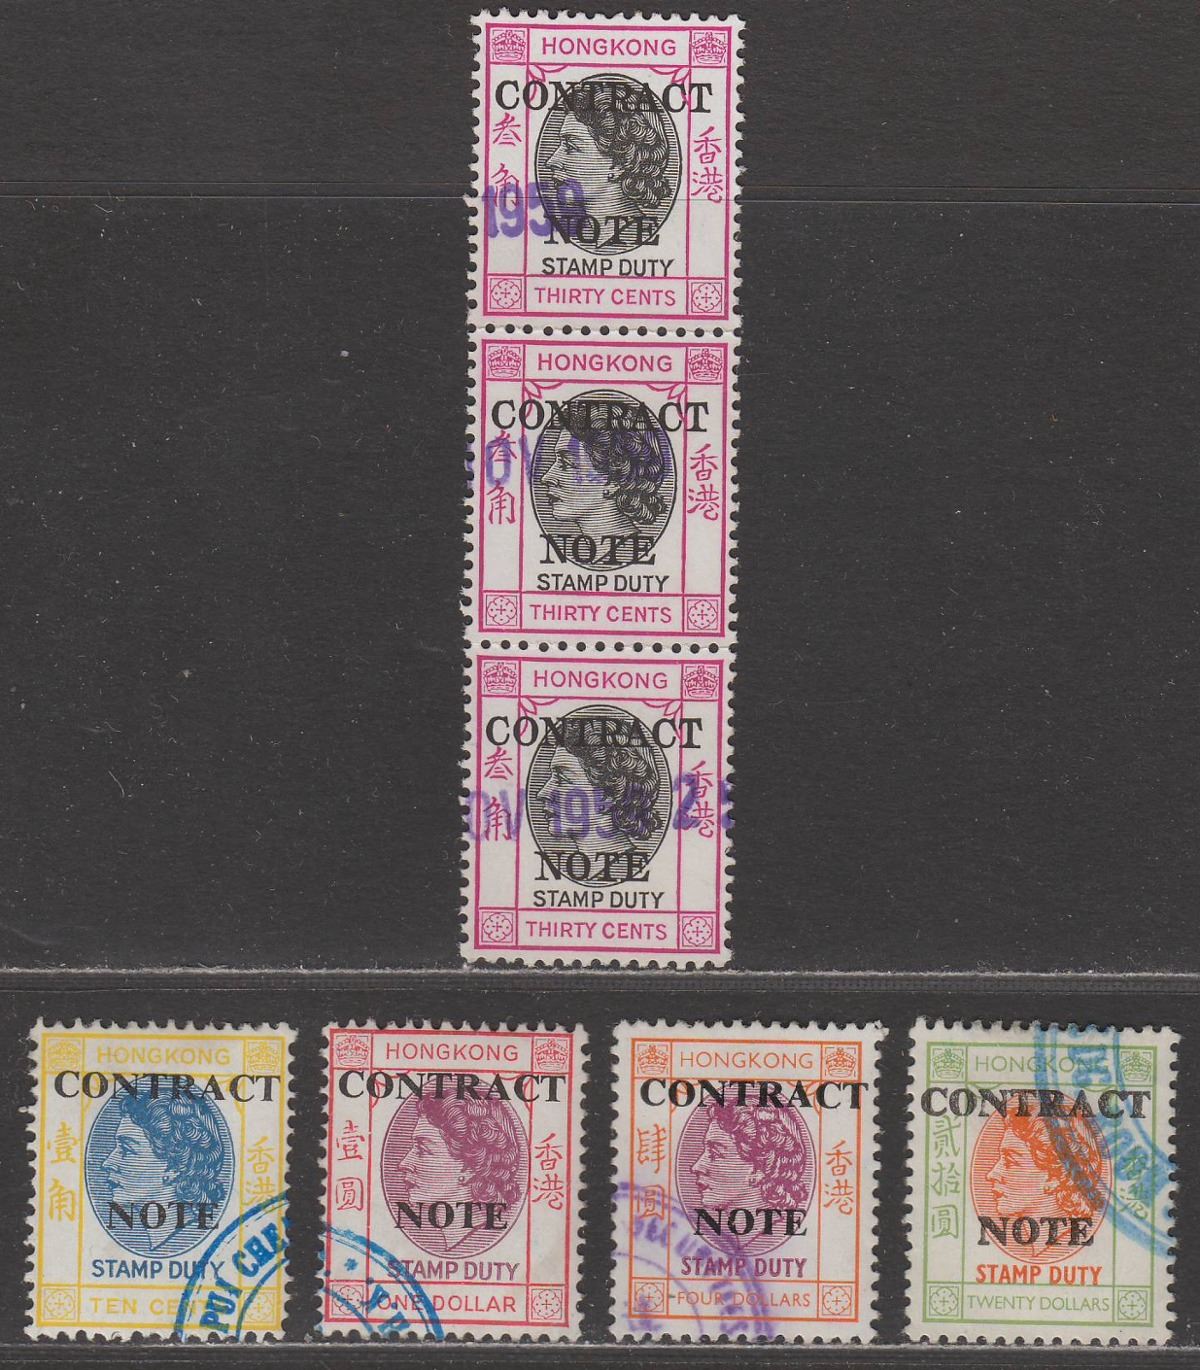 Hong Kong 1954-72 QEII Revenue Contract Note Overprint Selection to $20 Used 